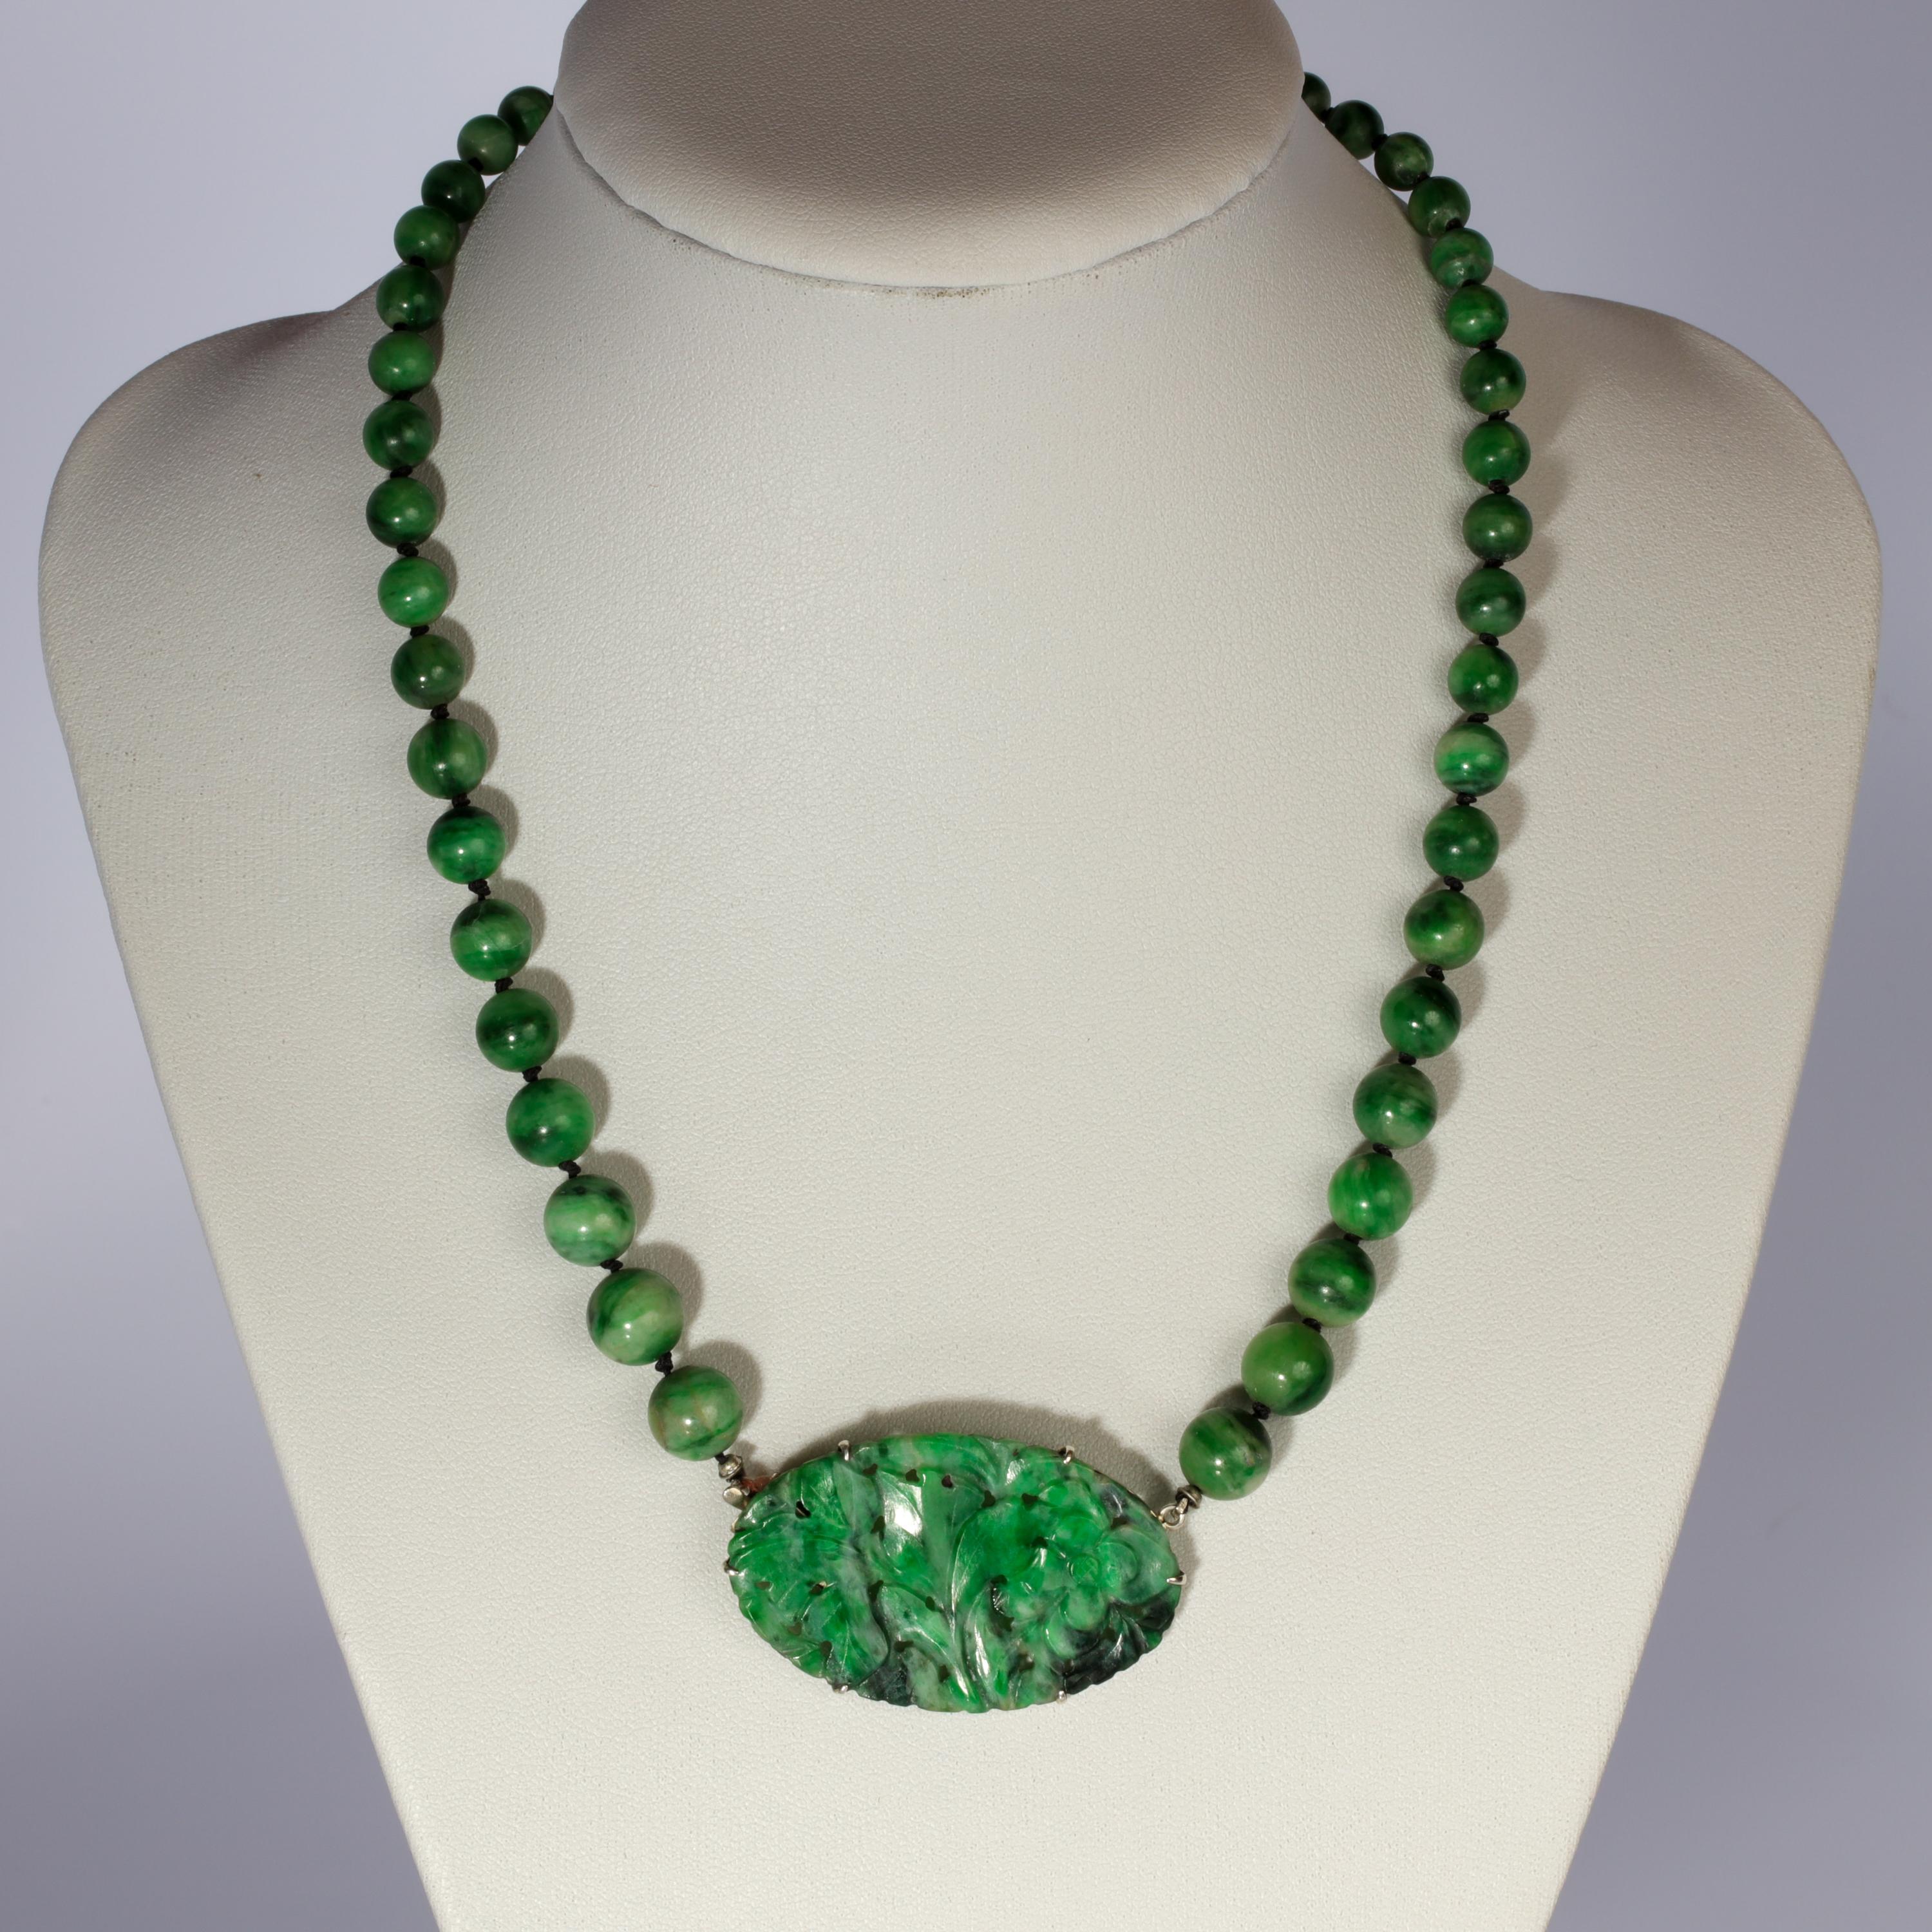 This richly saturated variegated green jadeite necklace was created around 1910 from 100% natural and untreated jadeite jade from Burma. The beads were each hand-carved and polished and the central plaque was carved in a floral motif. The necklace